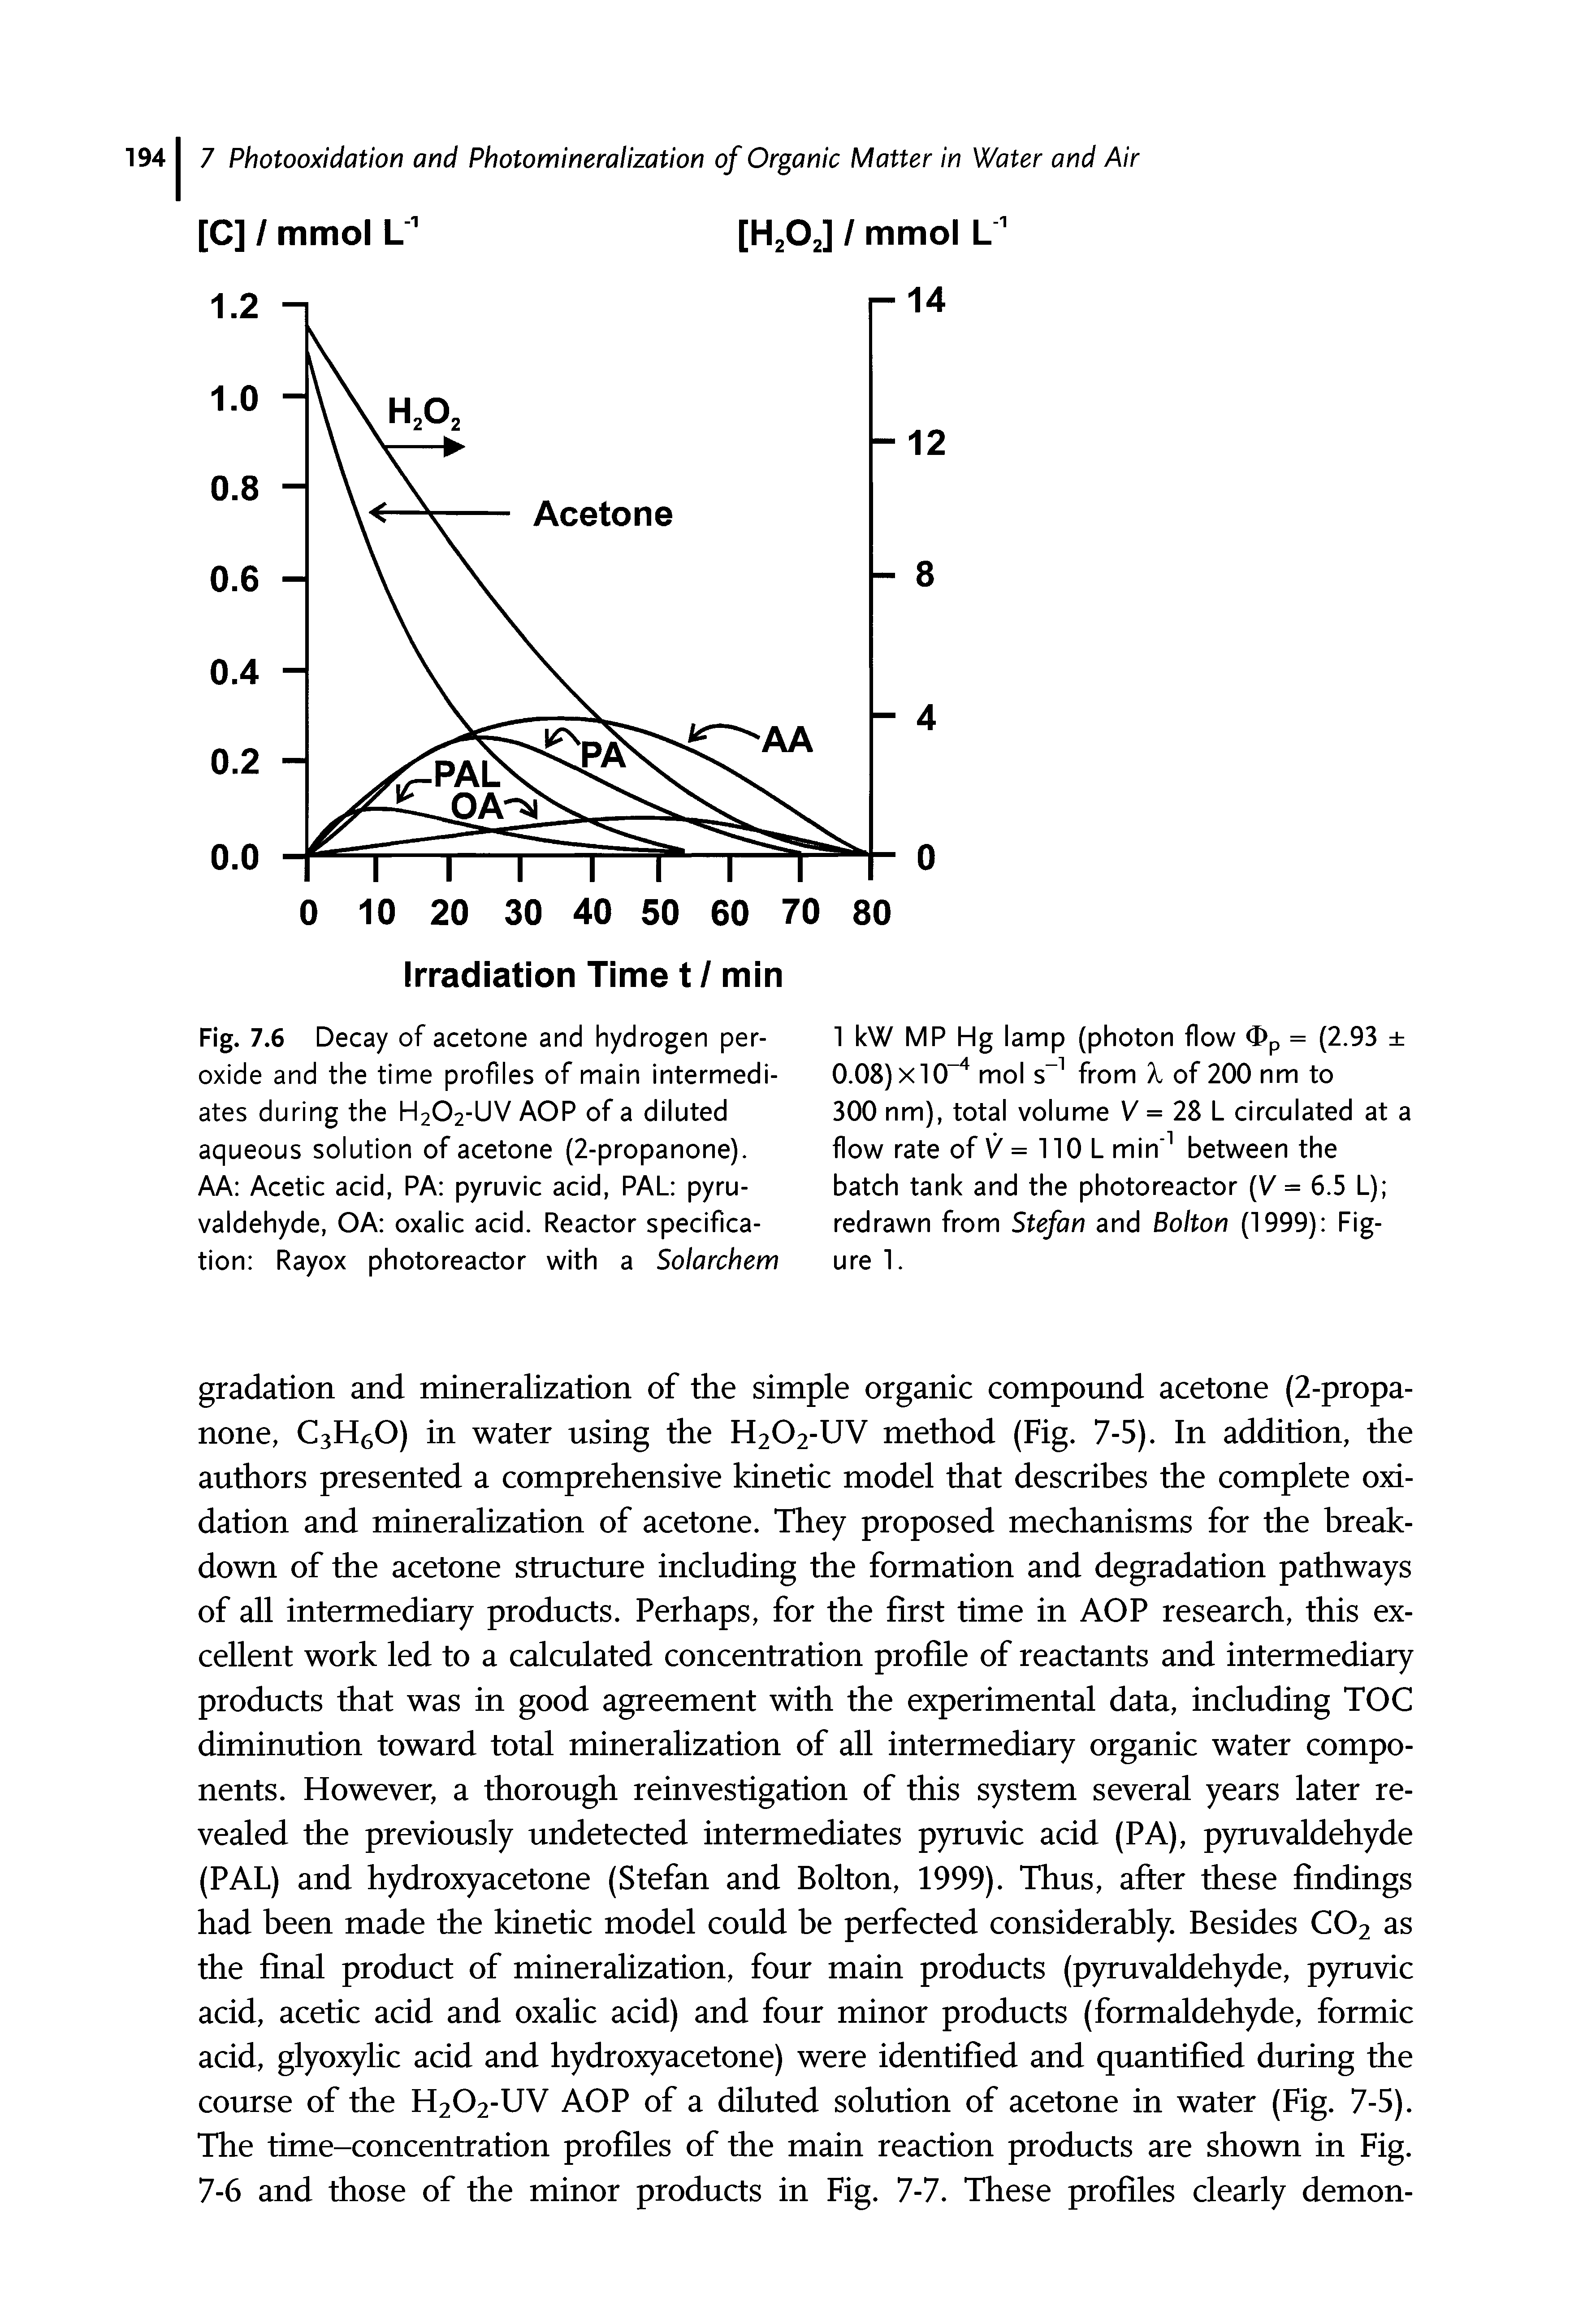 Fig. 7.6 Decay of acetone and hydrogen peroxide and the time profiles of main intermediates during the H2O2-UV AOP of a diluted aqueous solution of acetone (2-propanone). AA Acetic acid, PA pyruvic acid, PAL pyru-valdehyde, OA oxalic acid. Reactor specification Rayox photoreactor with a Solarchem...